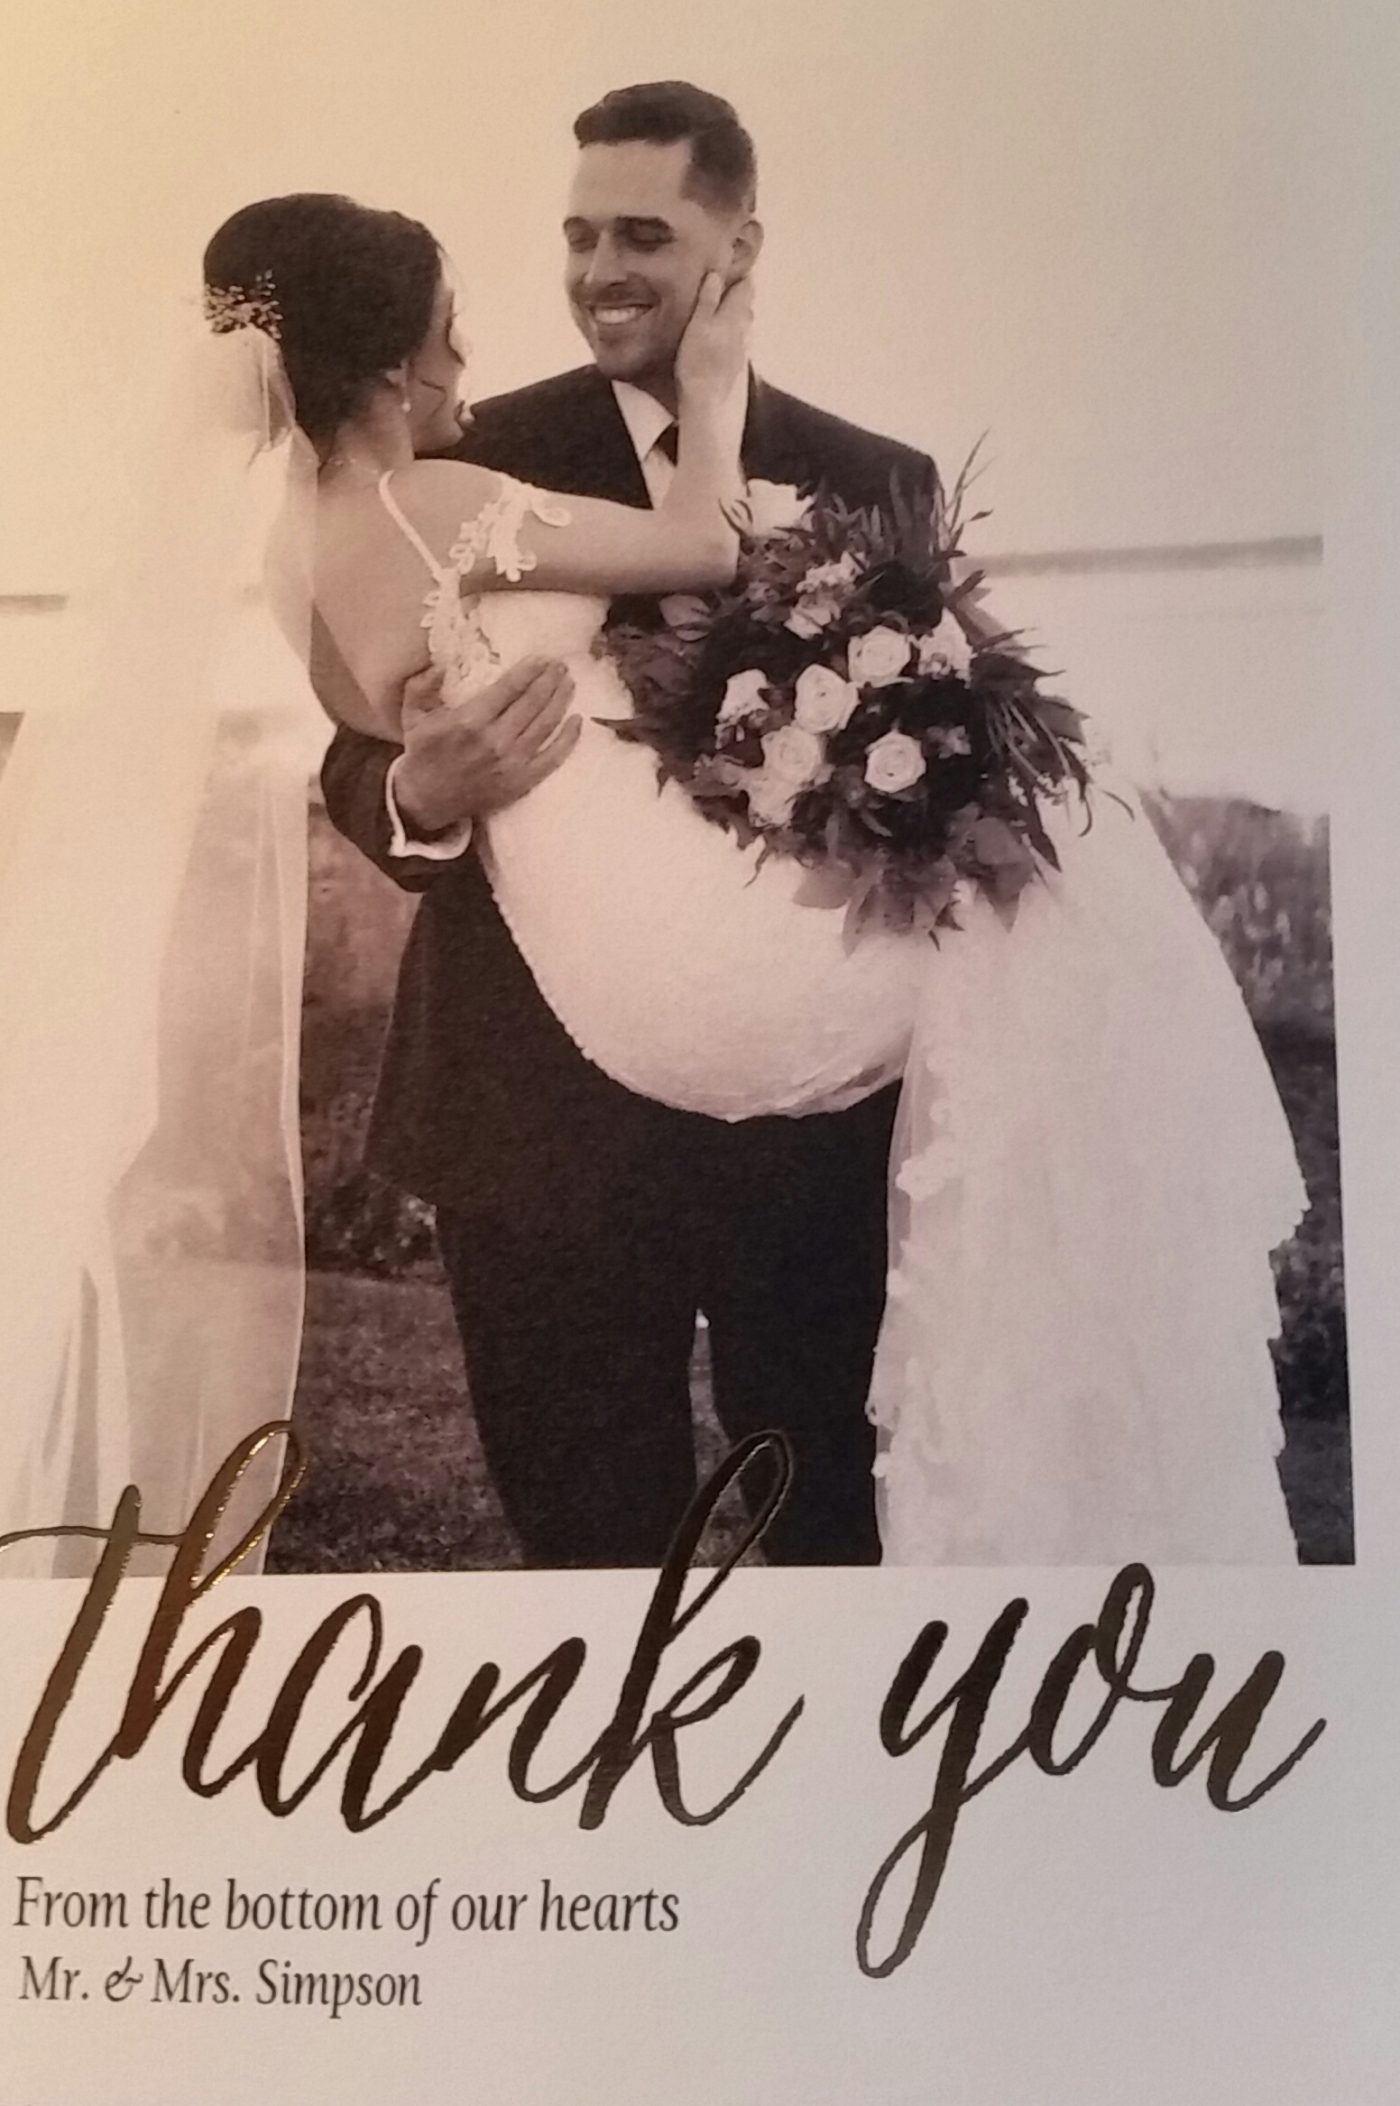 A Thank You Note to a Grateful Officiant!